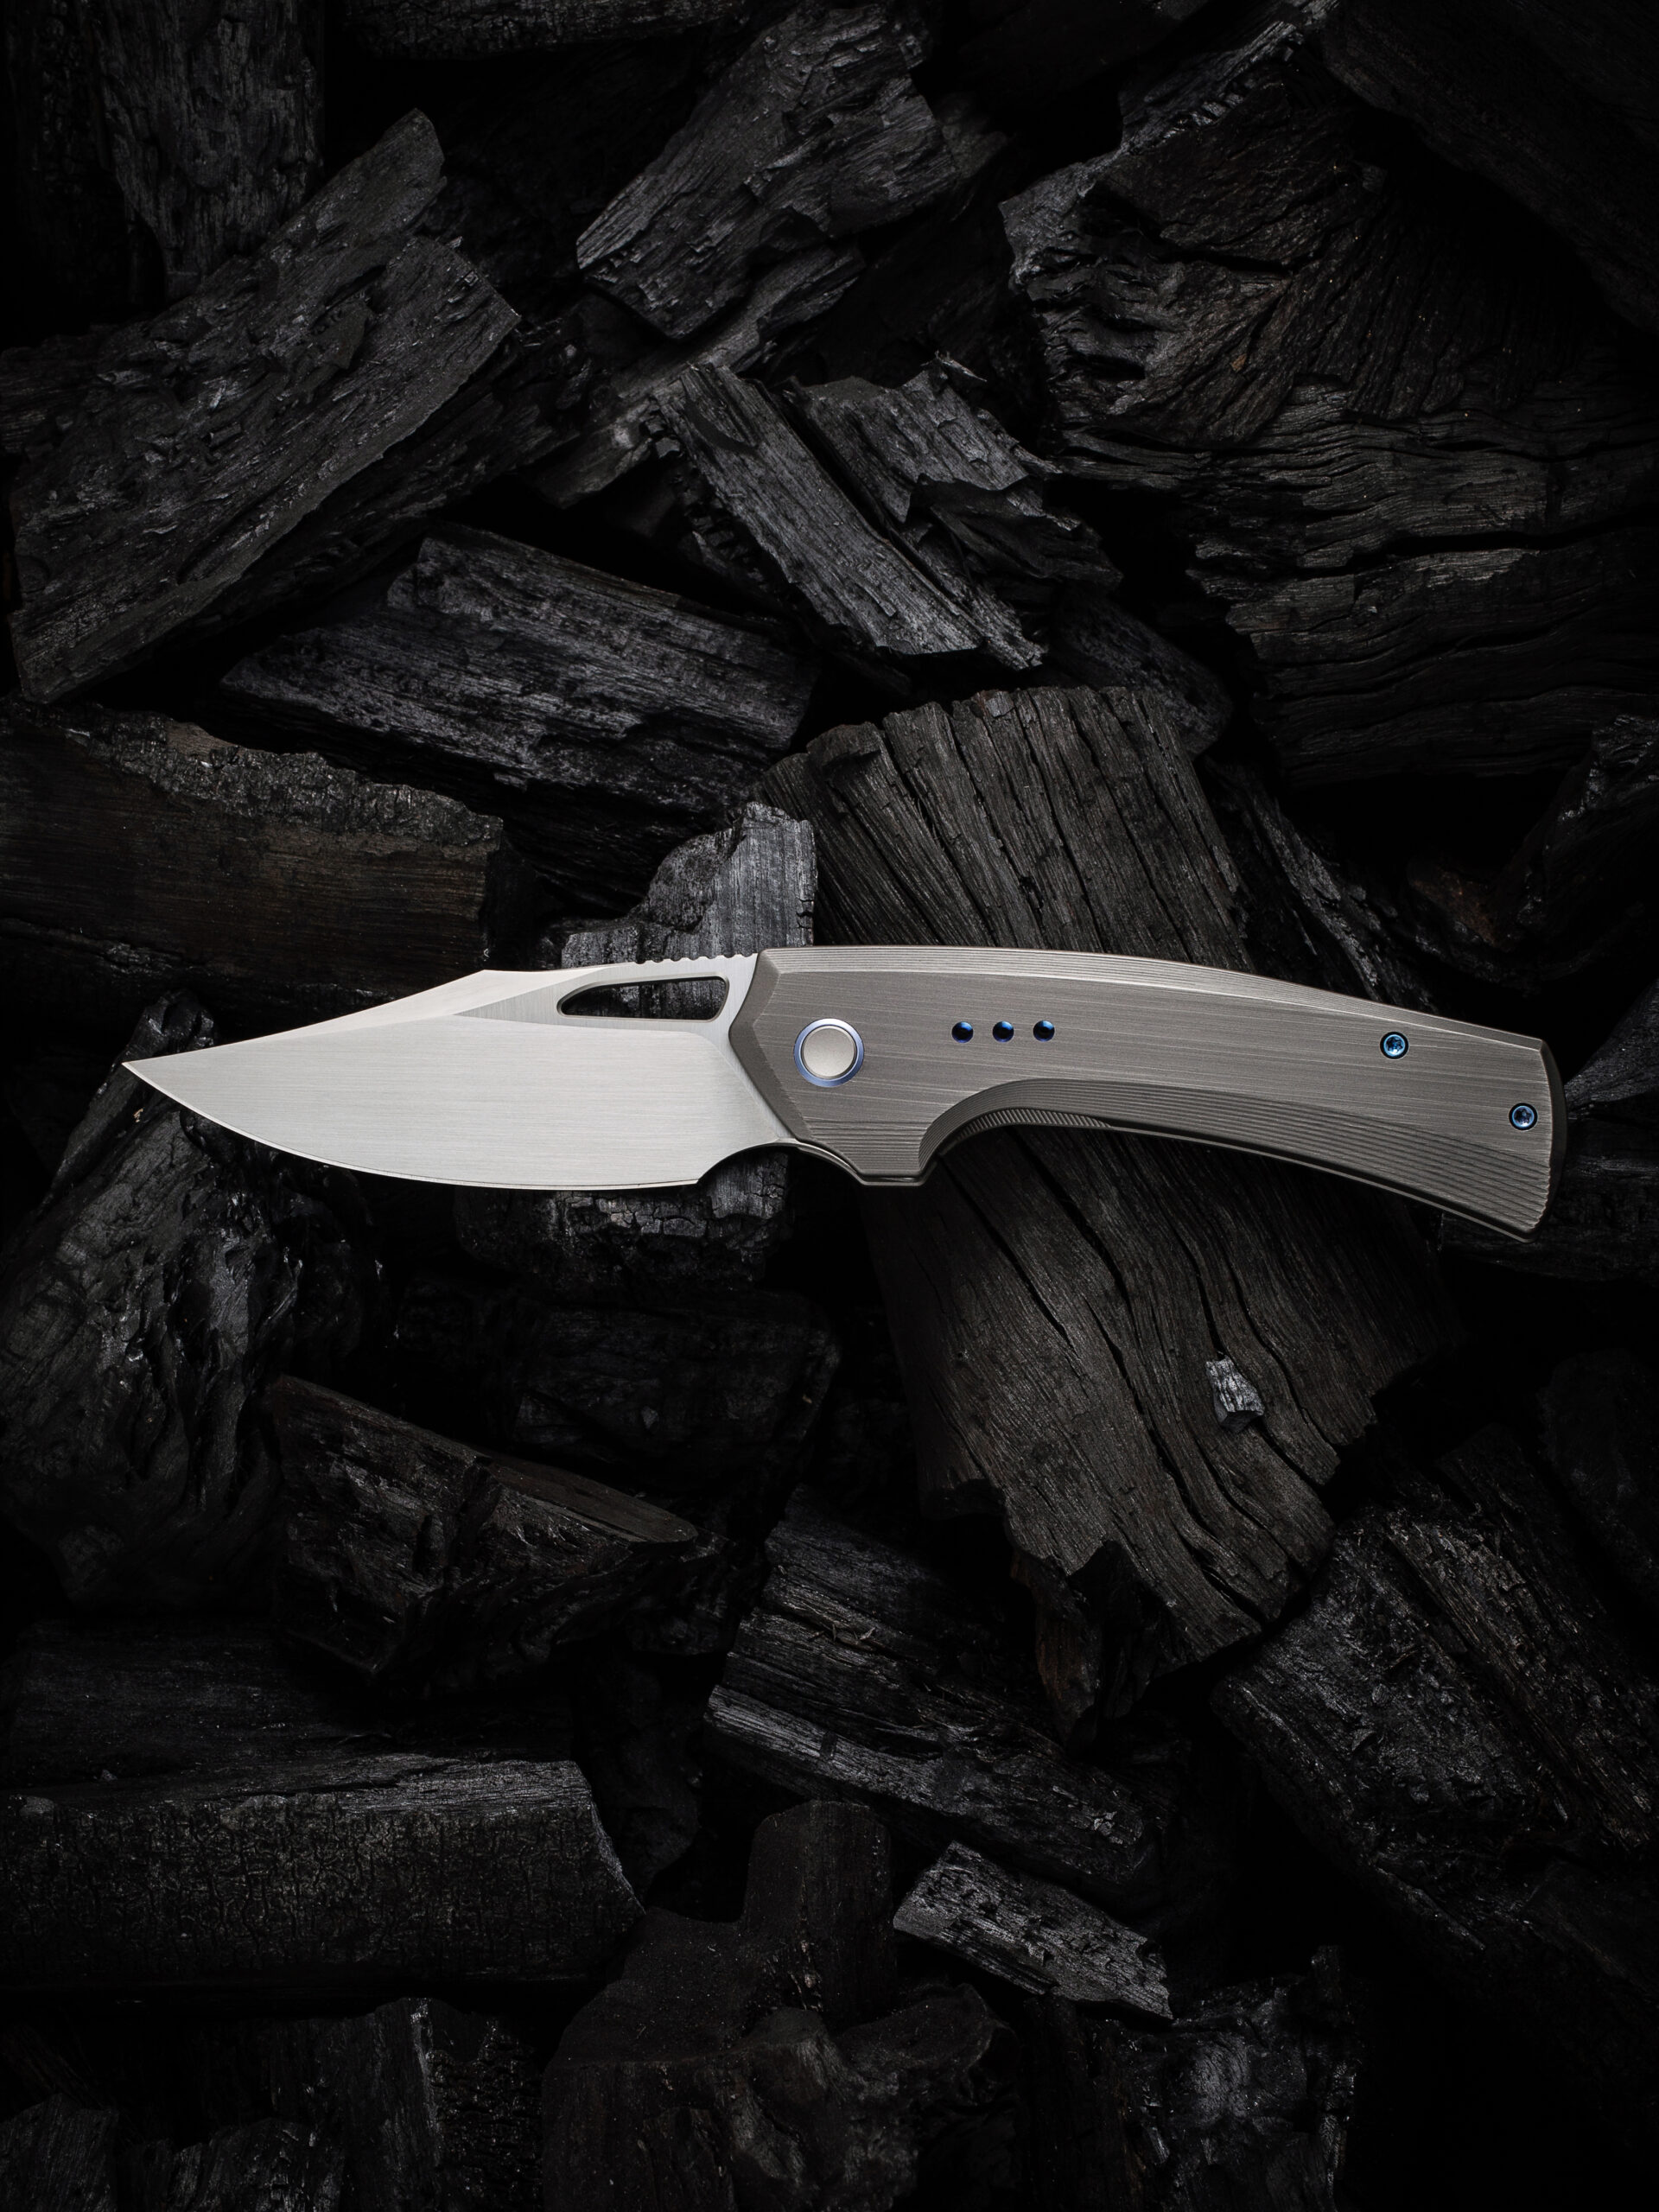 Best from WE Knife Company of 2020 Available at KnifeCenter 